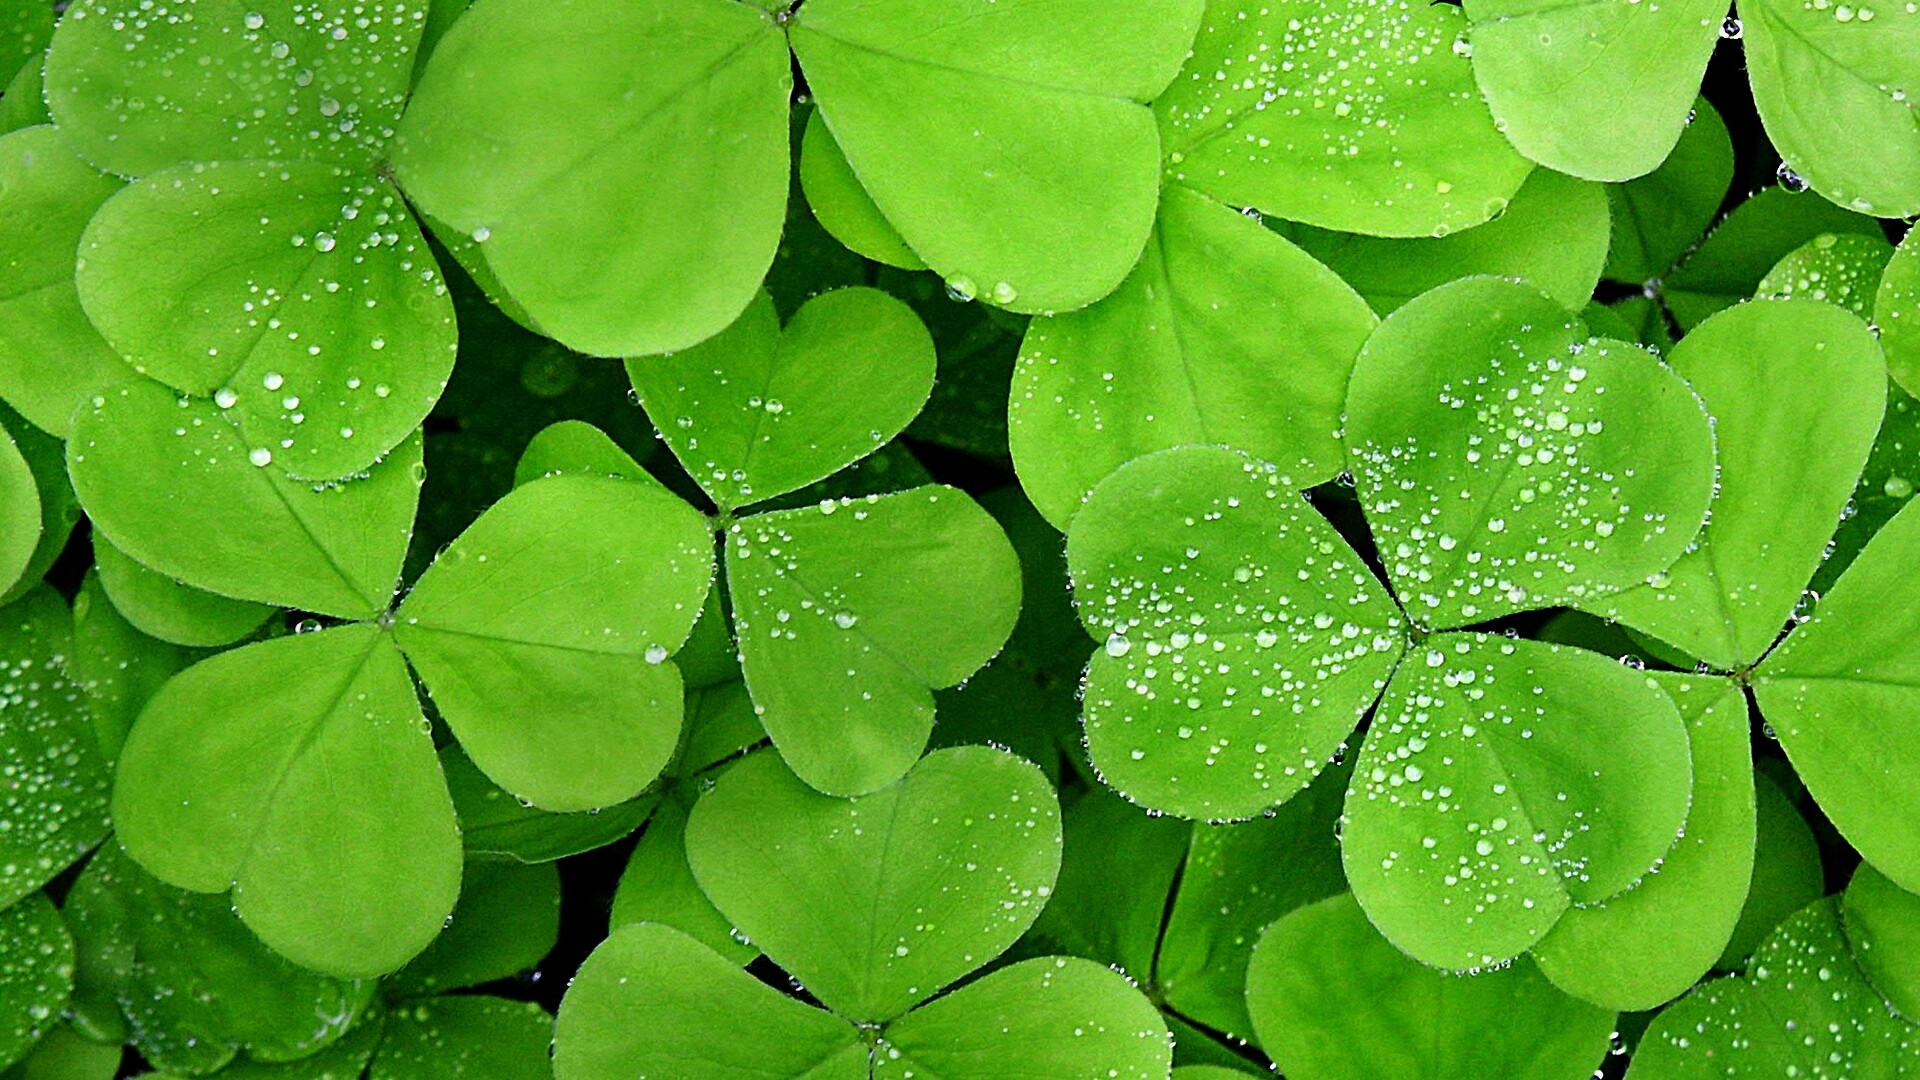 Leaf: Clover, Attached by a continuous vascular system to the rest of the plant. 1920x1080 Full HD Wallpaper.